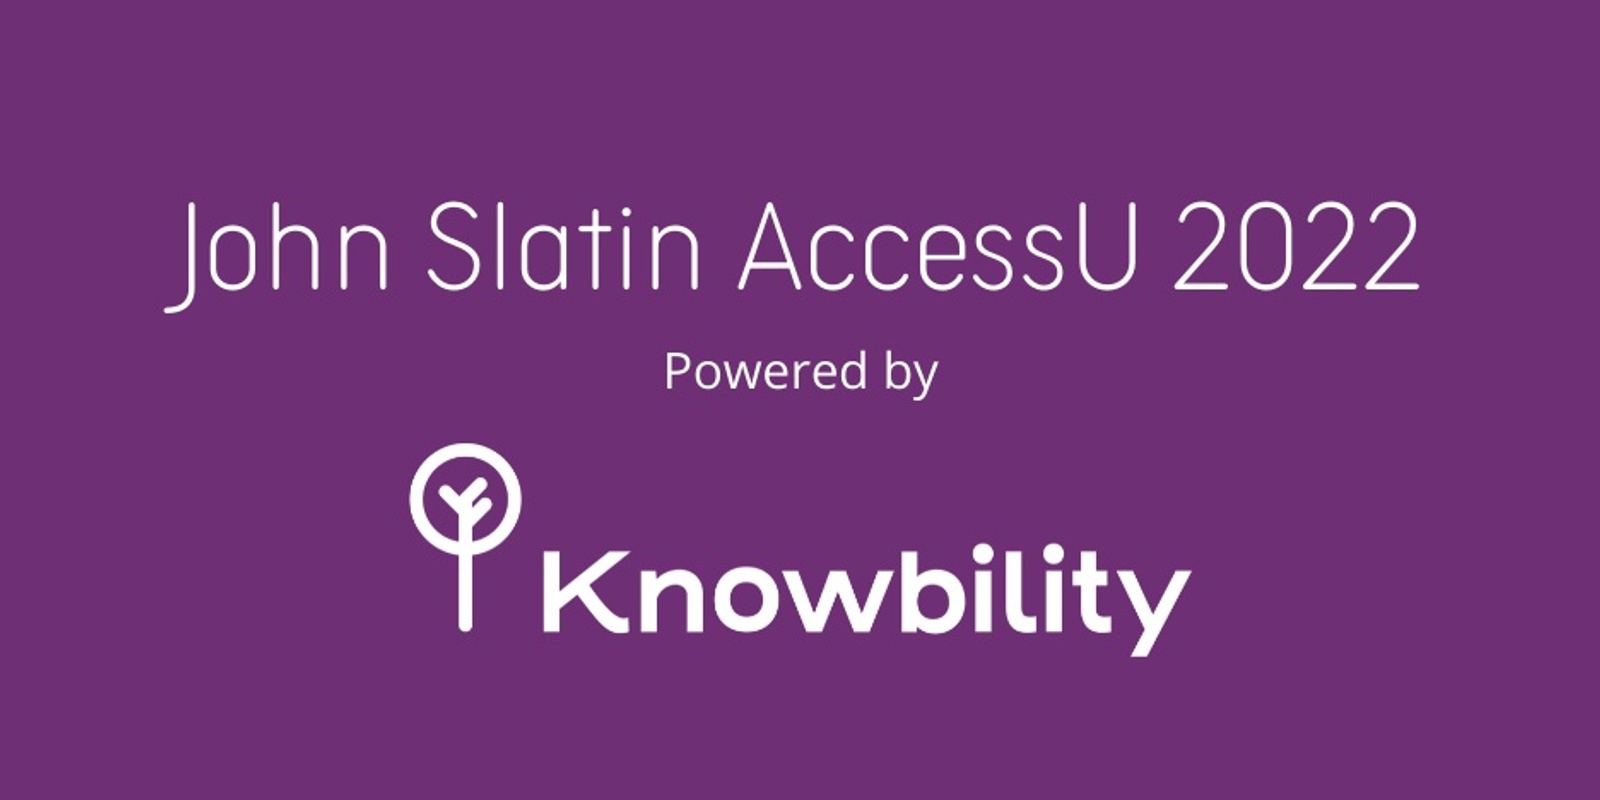 Banner image for John Slatin AccessU 2022 powered by Knowbility